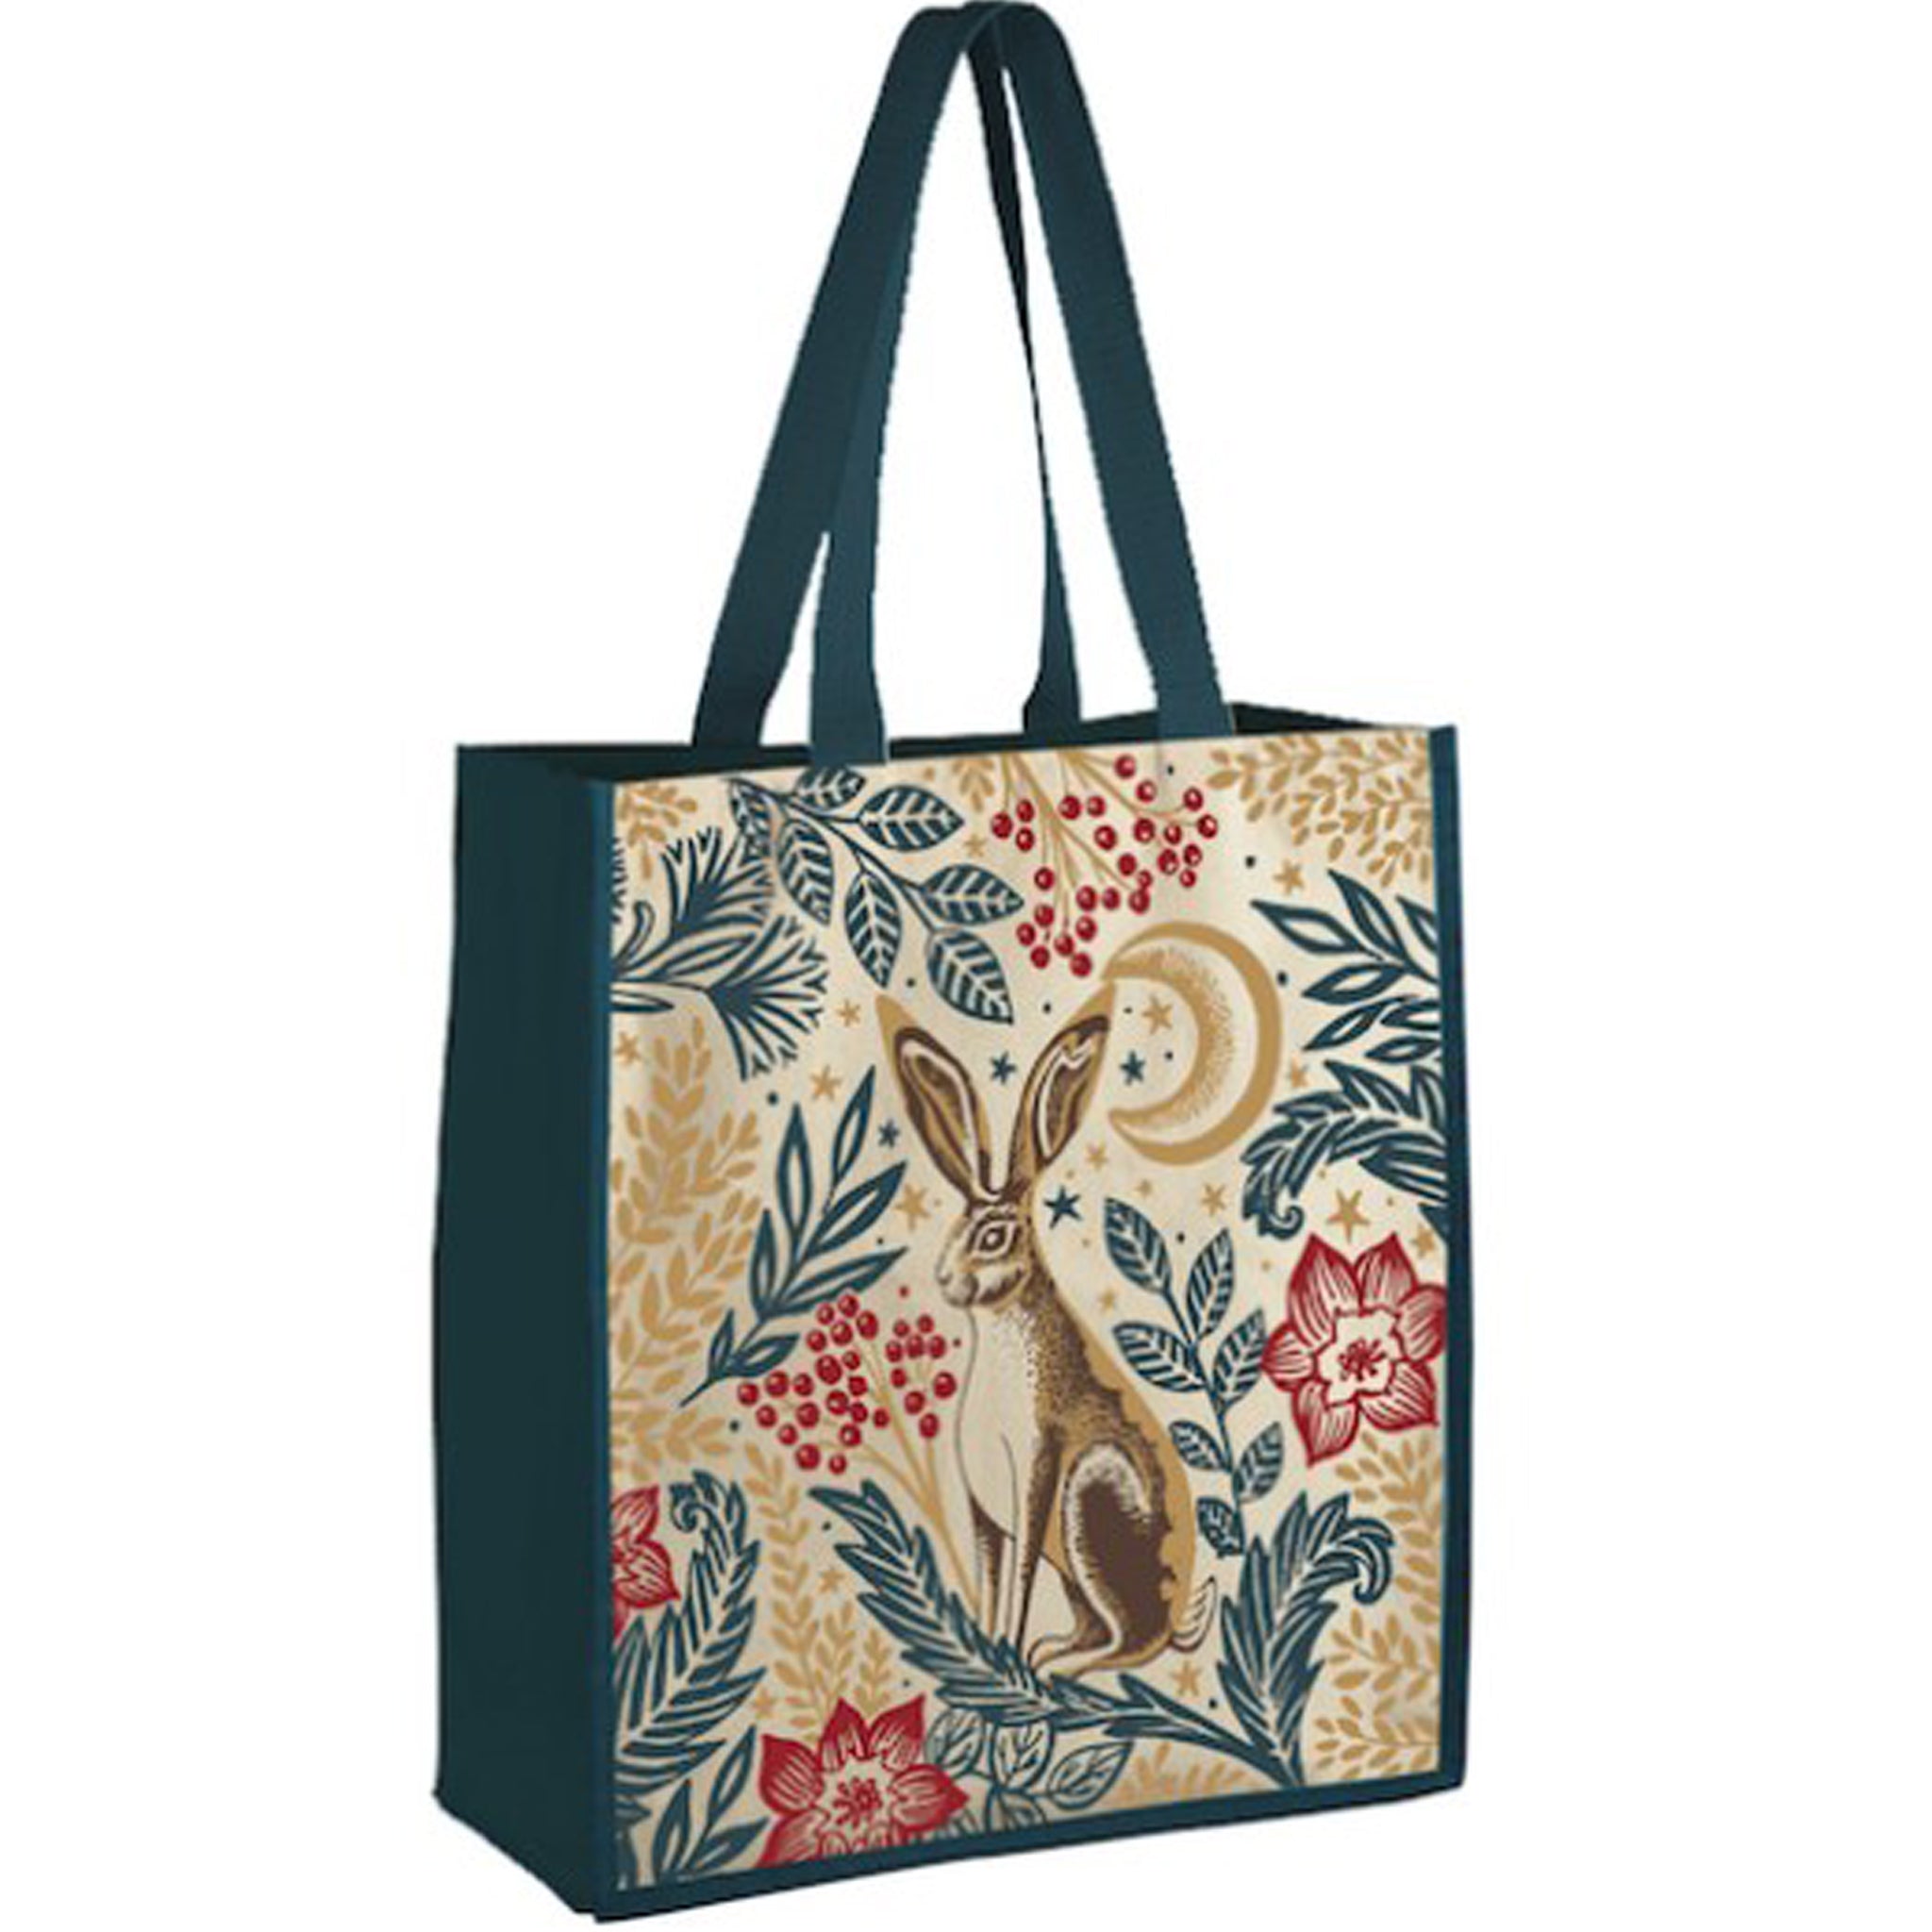 Folk Hare recycled cotton tote